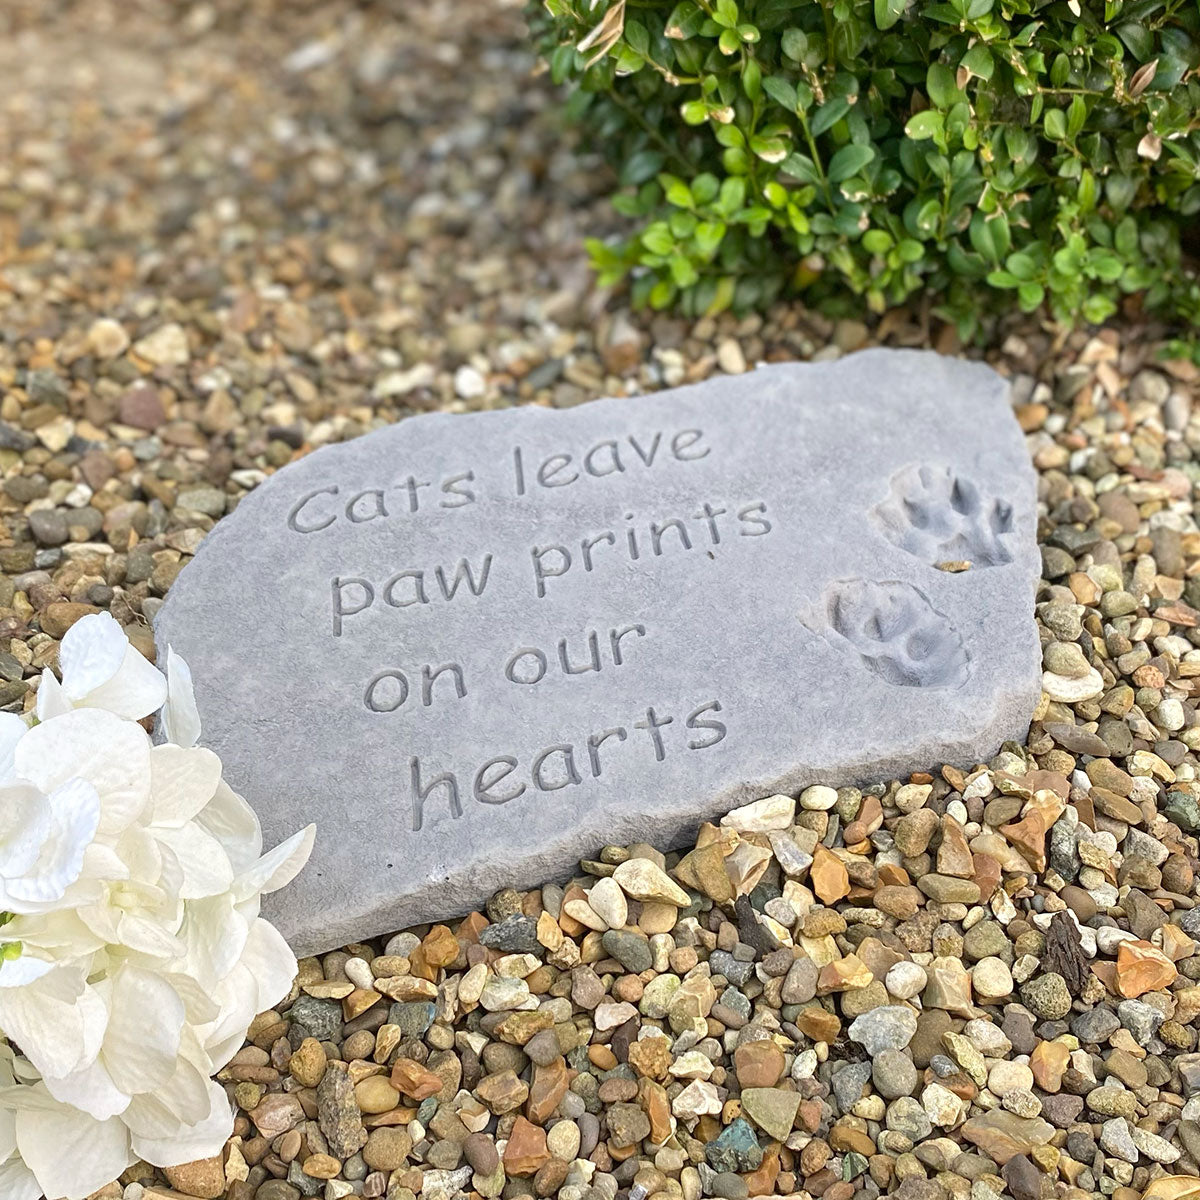 Cater for your customers who love gifts and decor for their home and garden that celebrate their pets, past and present.